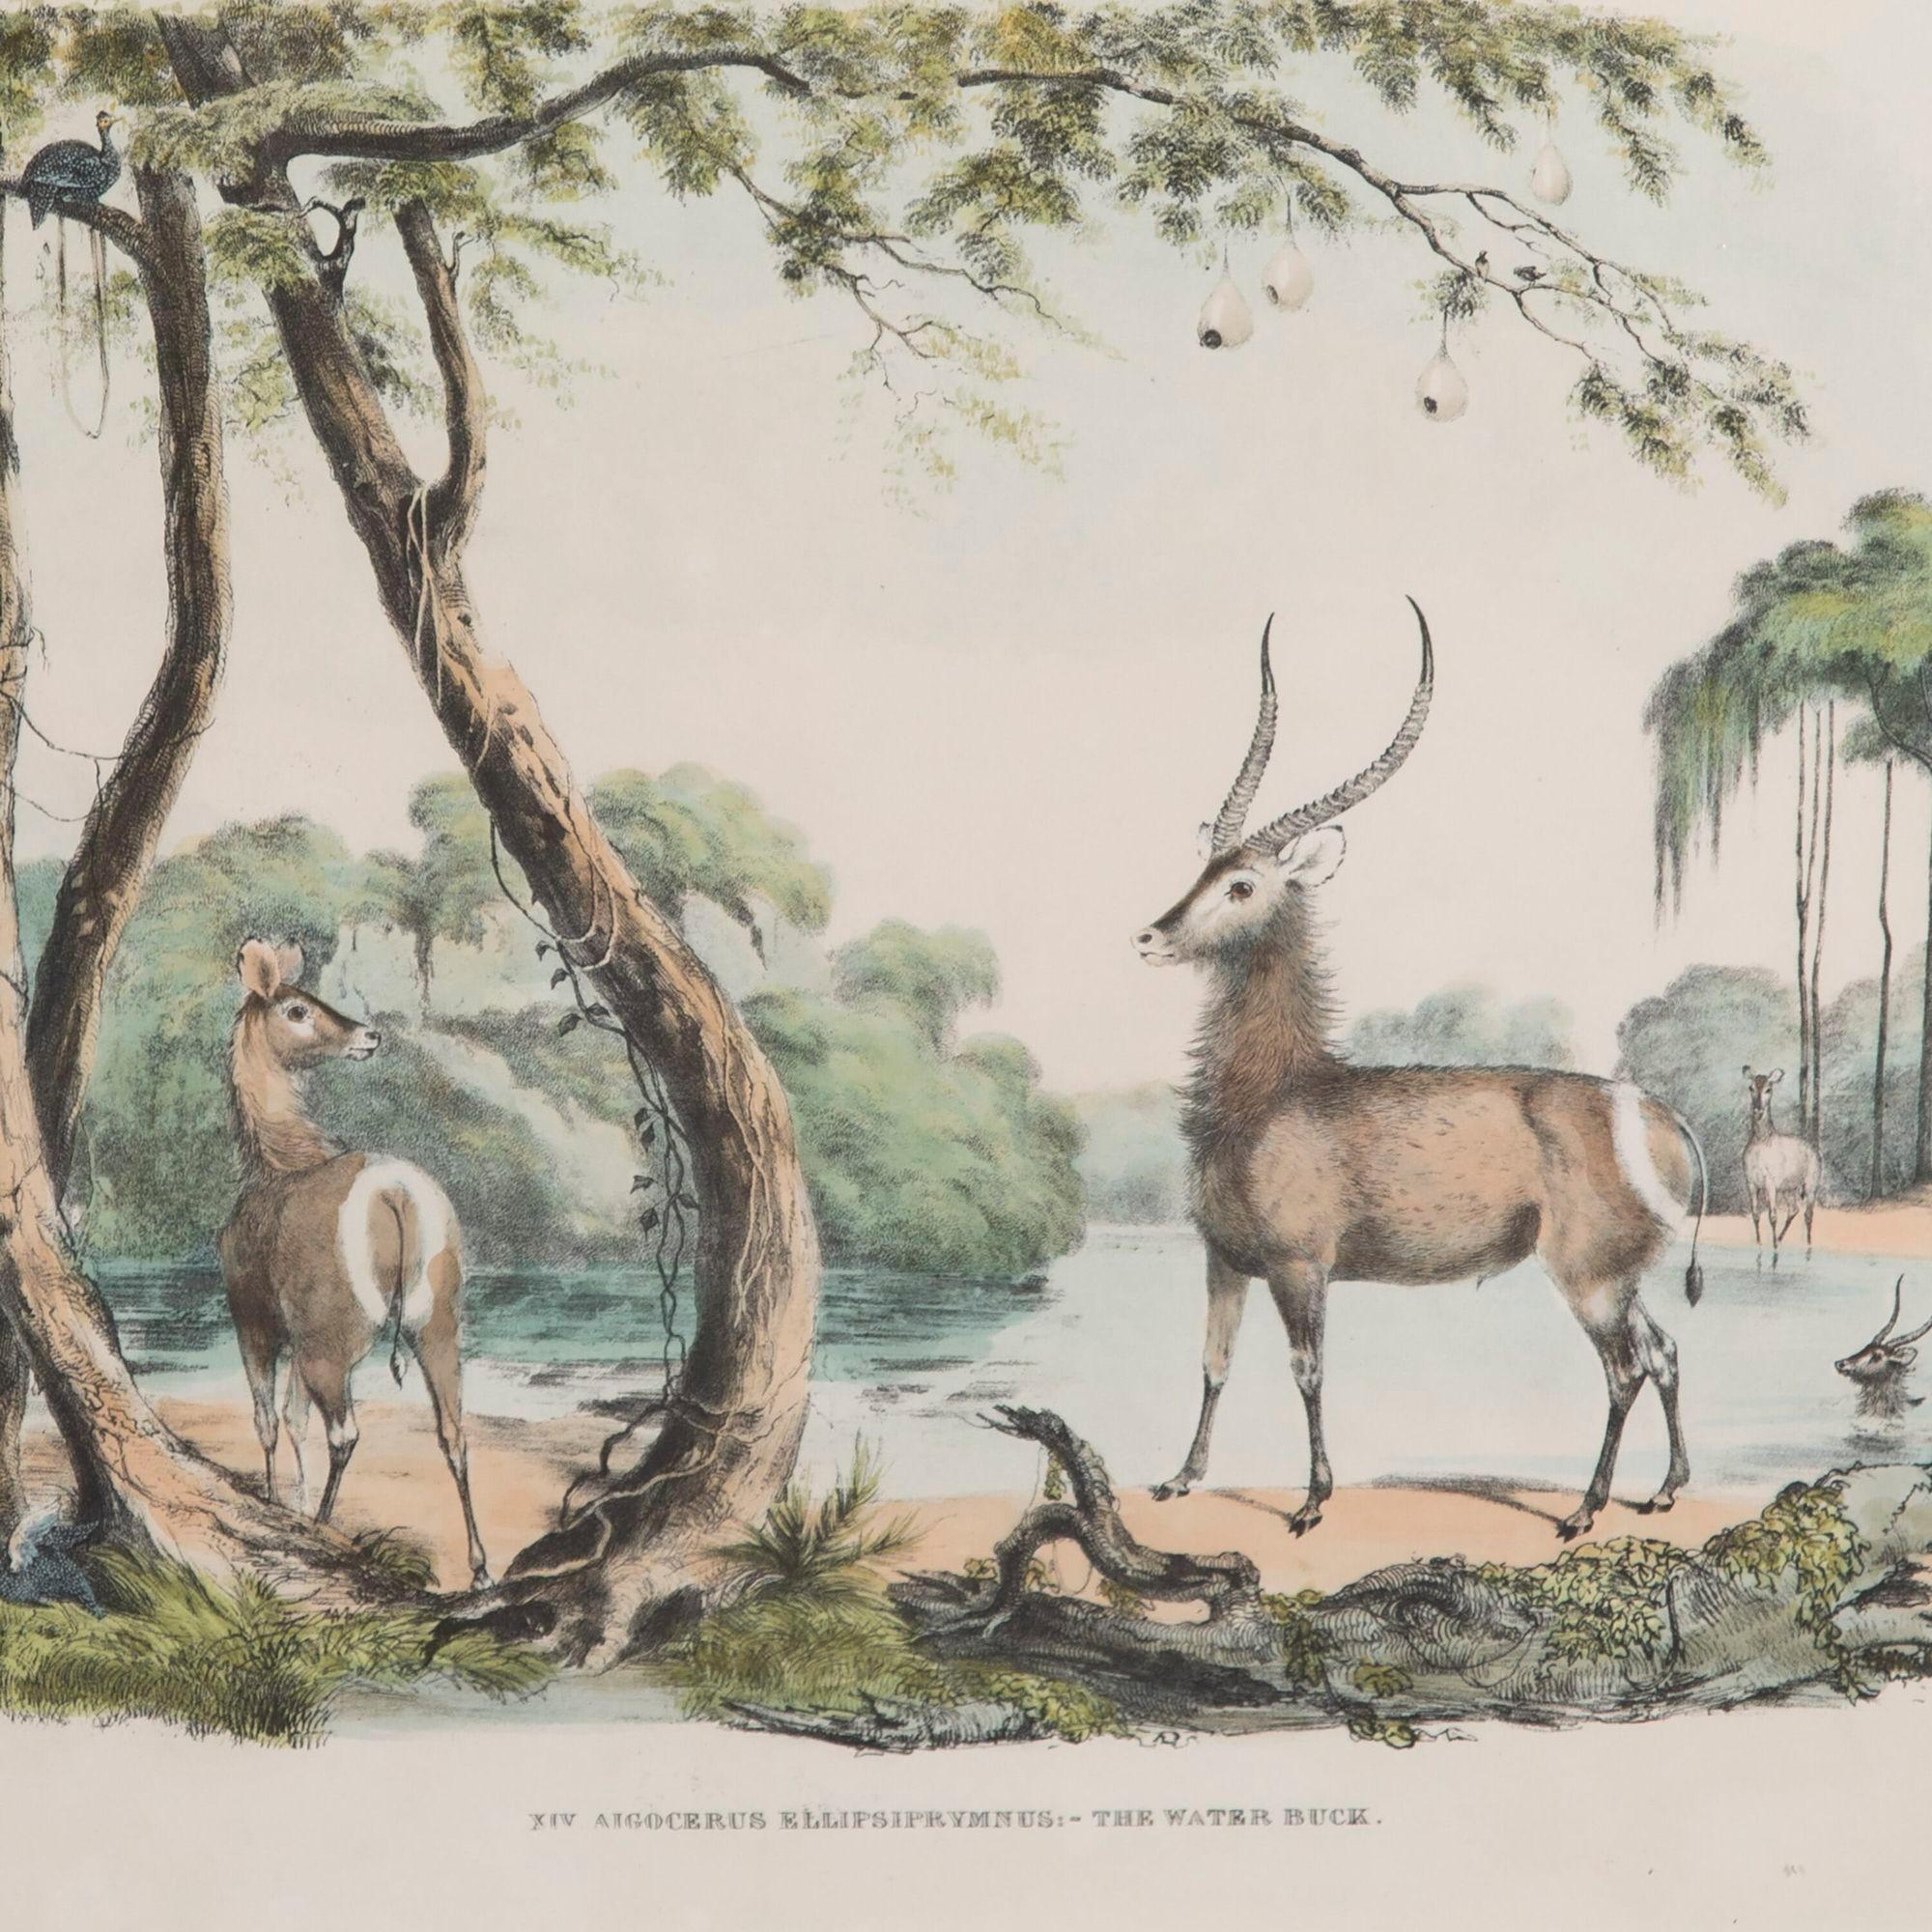 British Colonial 19th Century African Wildlife Lithographs